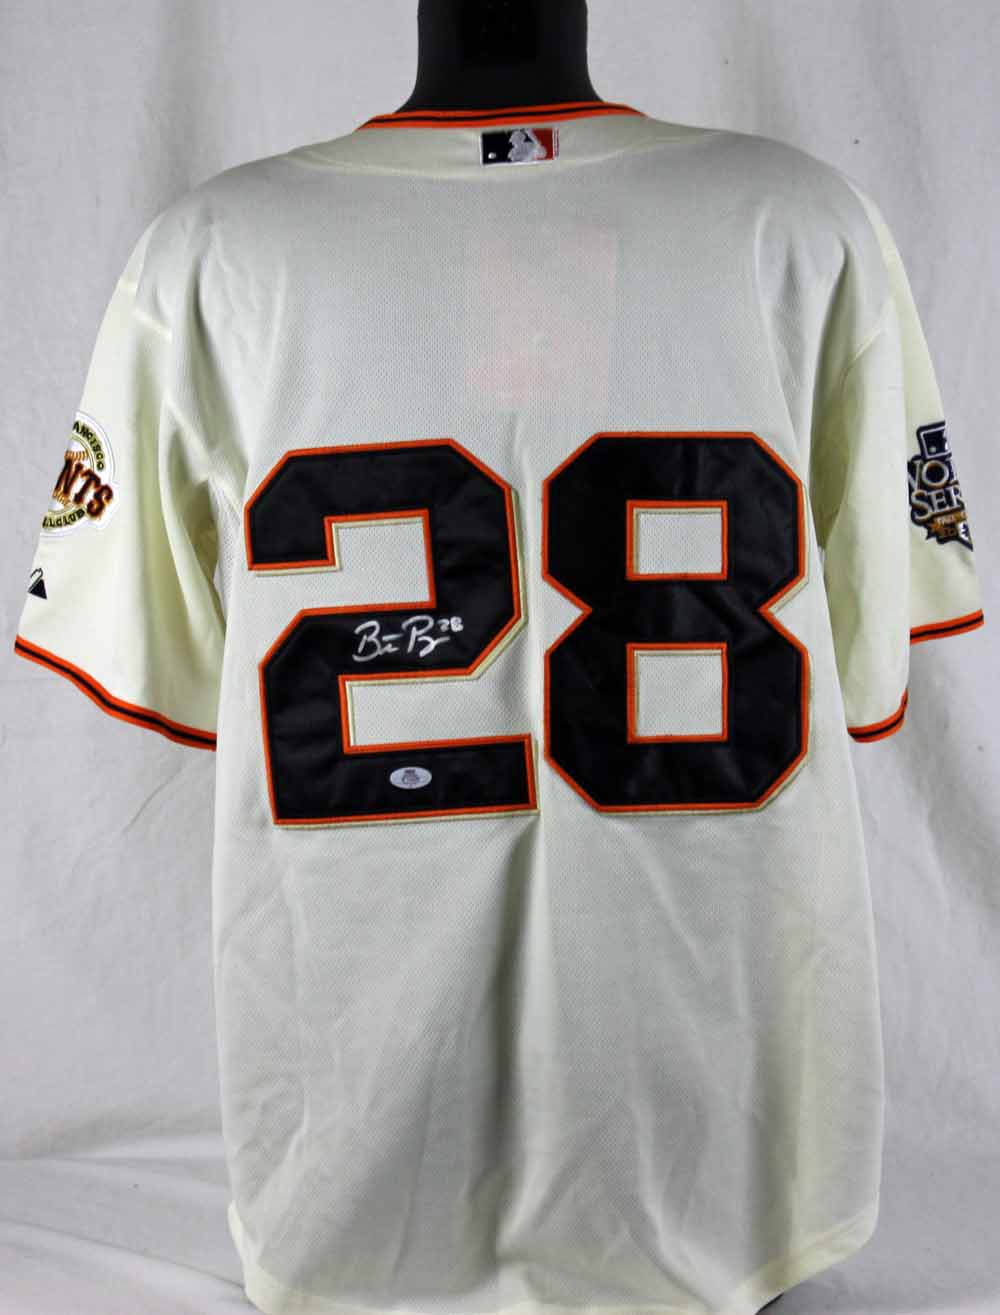 buster posey jersey for sale game used